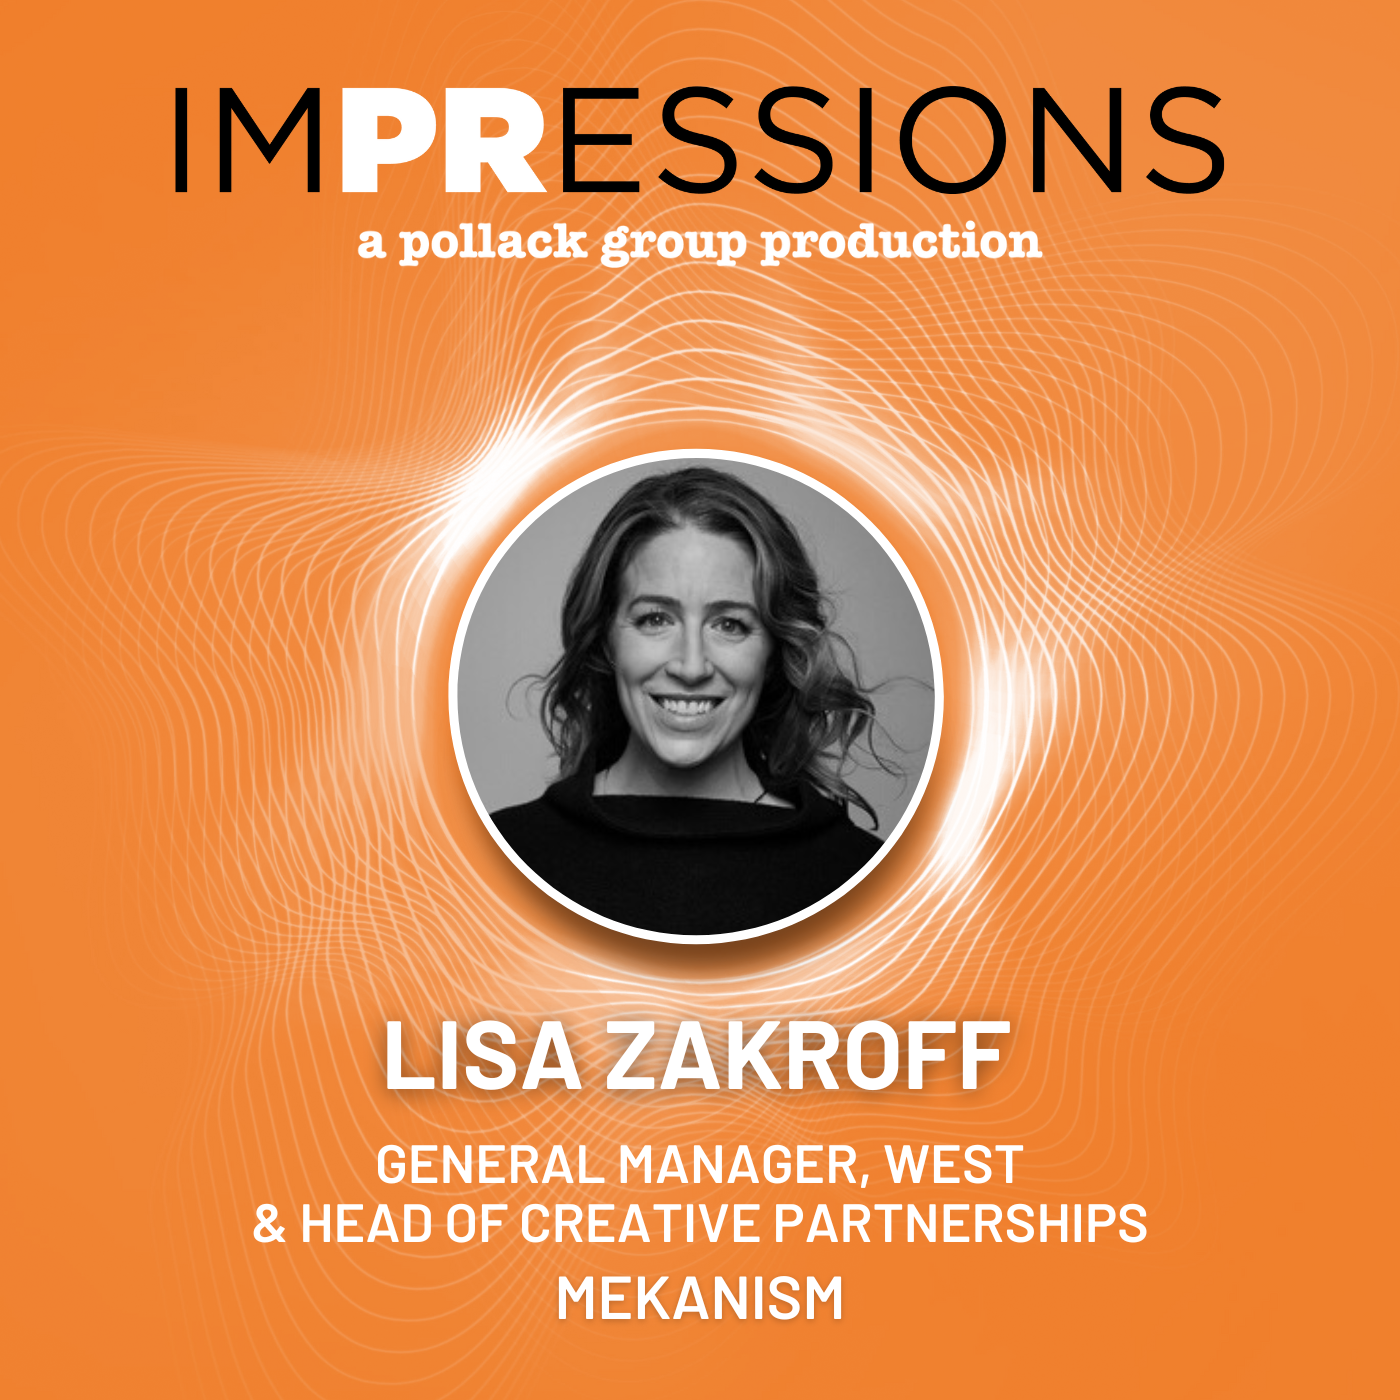 Promotional graphic for IMPRESSIONS featuring Lisa Zakroff from MEKANISM.